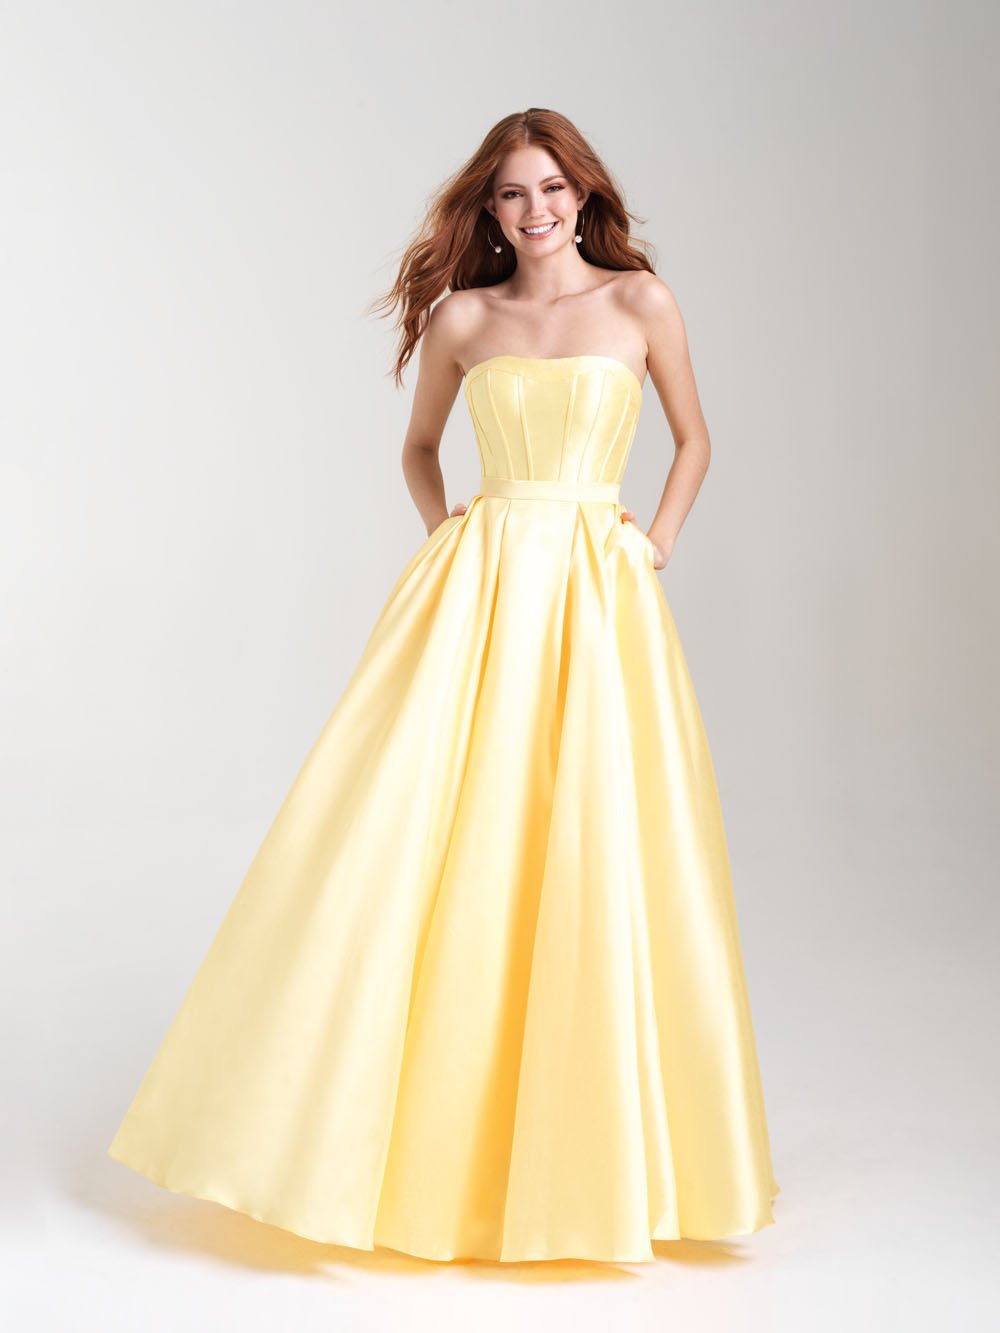 Madison James 20-323 dress images in these colors: Royal, Yellow, Burgundy, Coral, Pink.